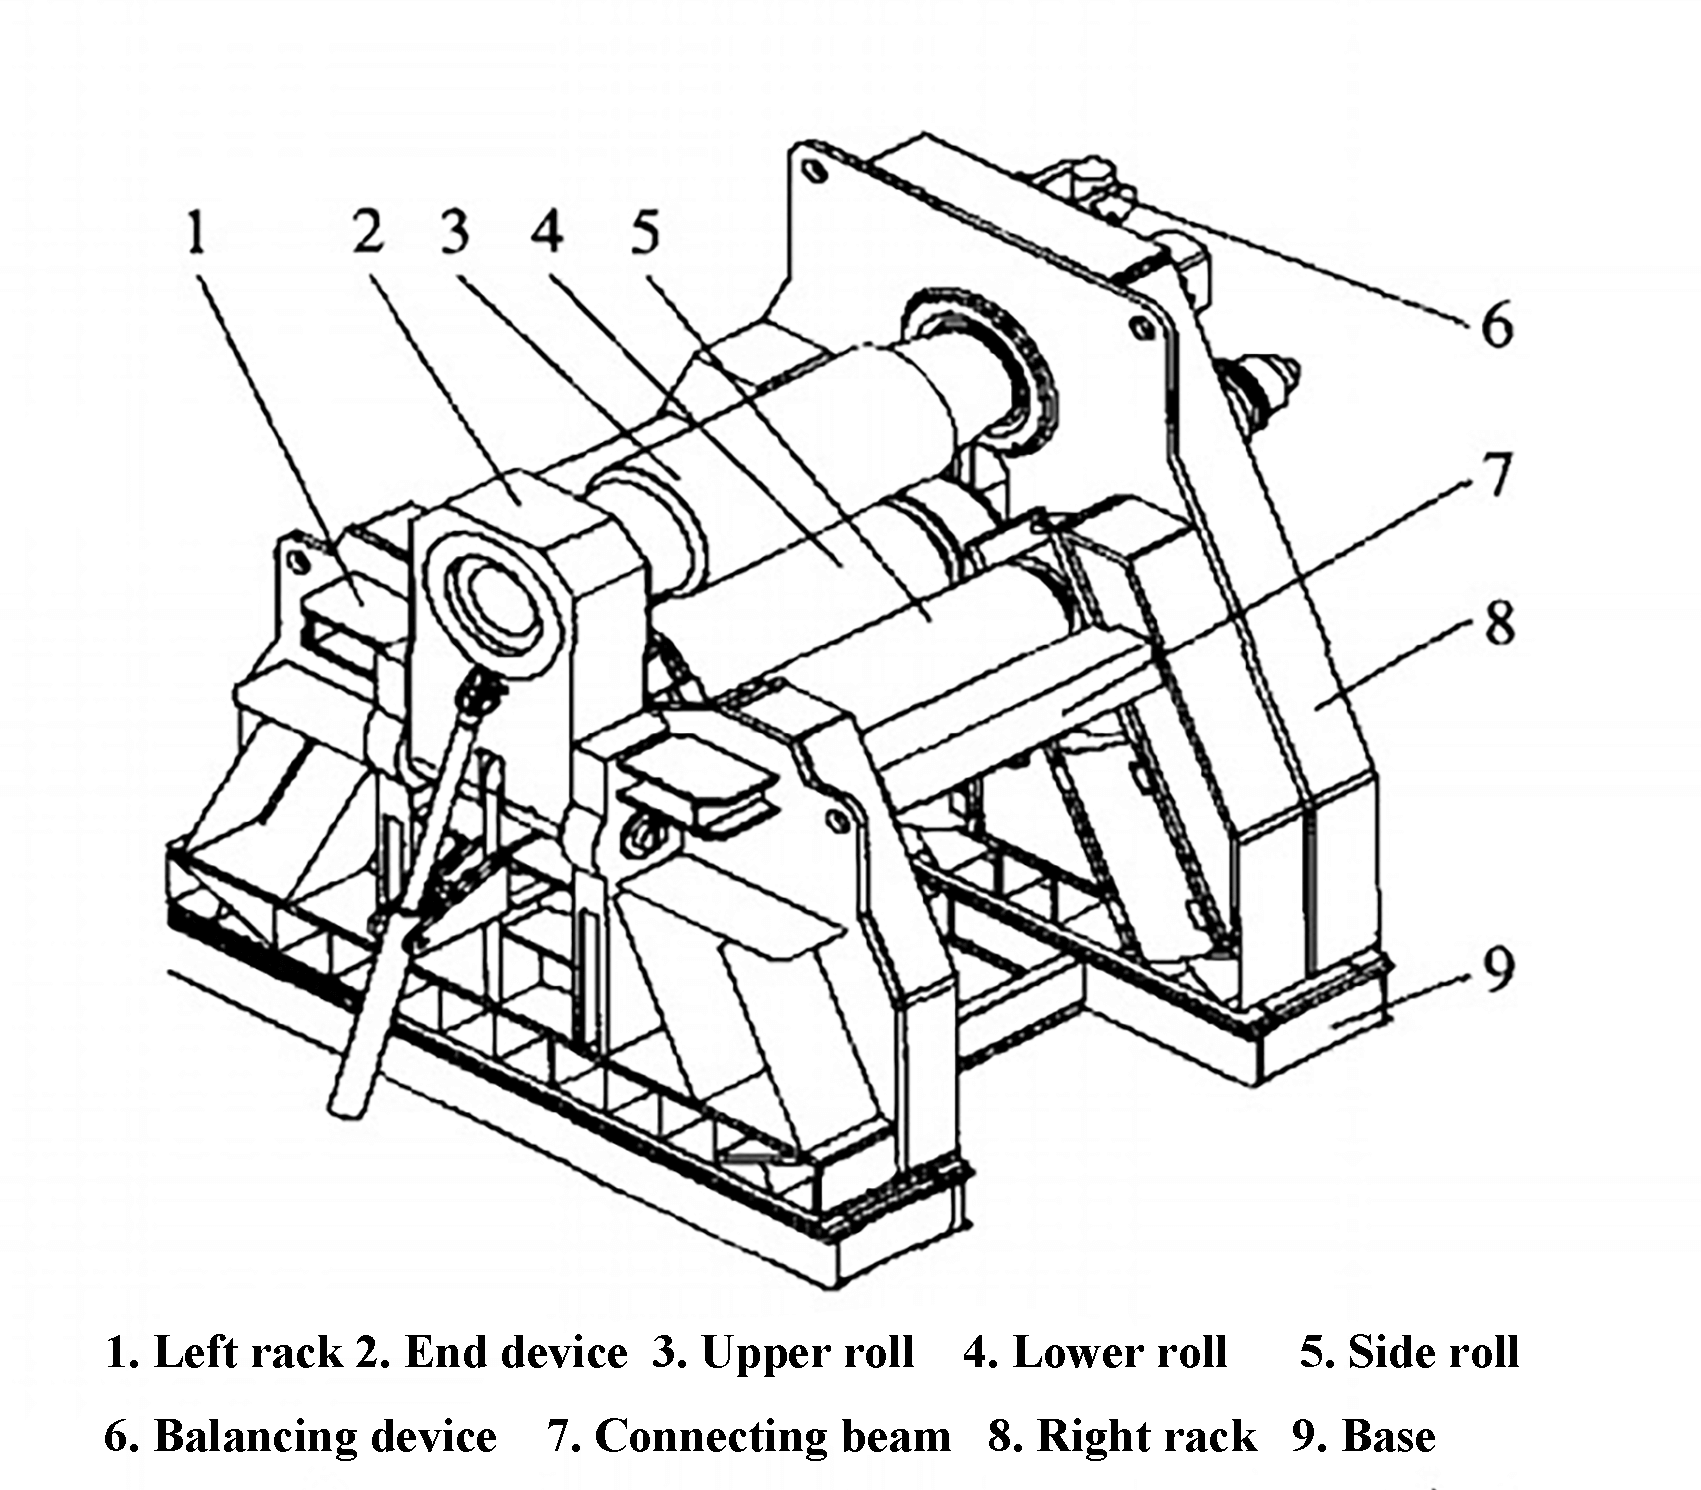 Fig. 1 Structure of four-roll plate bending machine